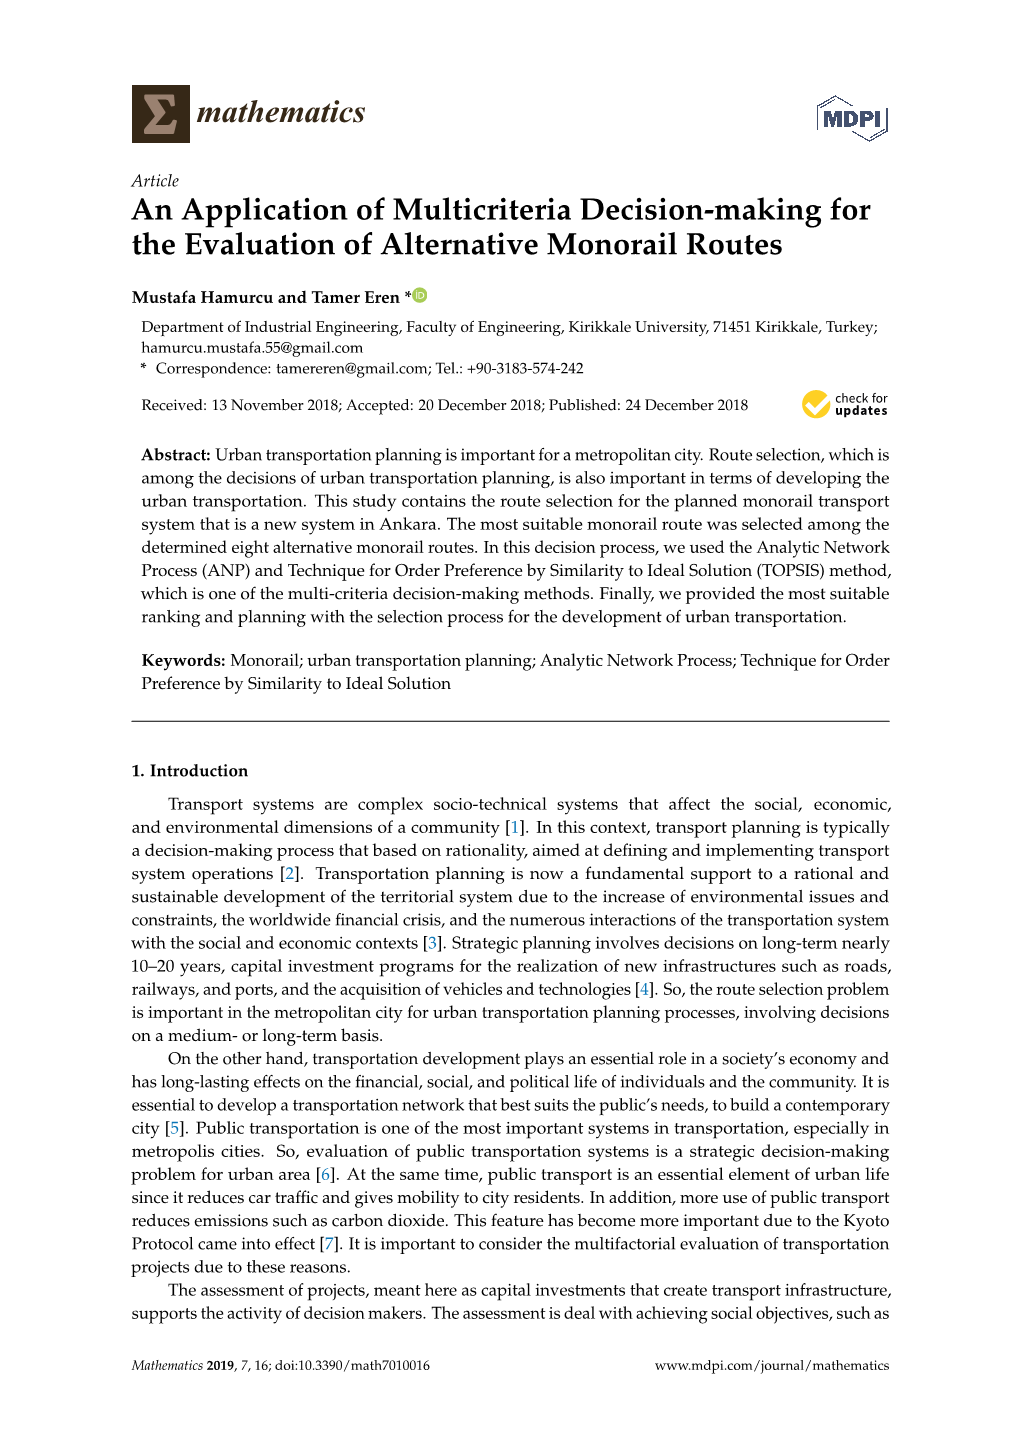 An Application of Multicriteria Decision-Making for the Evaluation of Alternative Monorail Routes